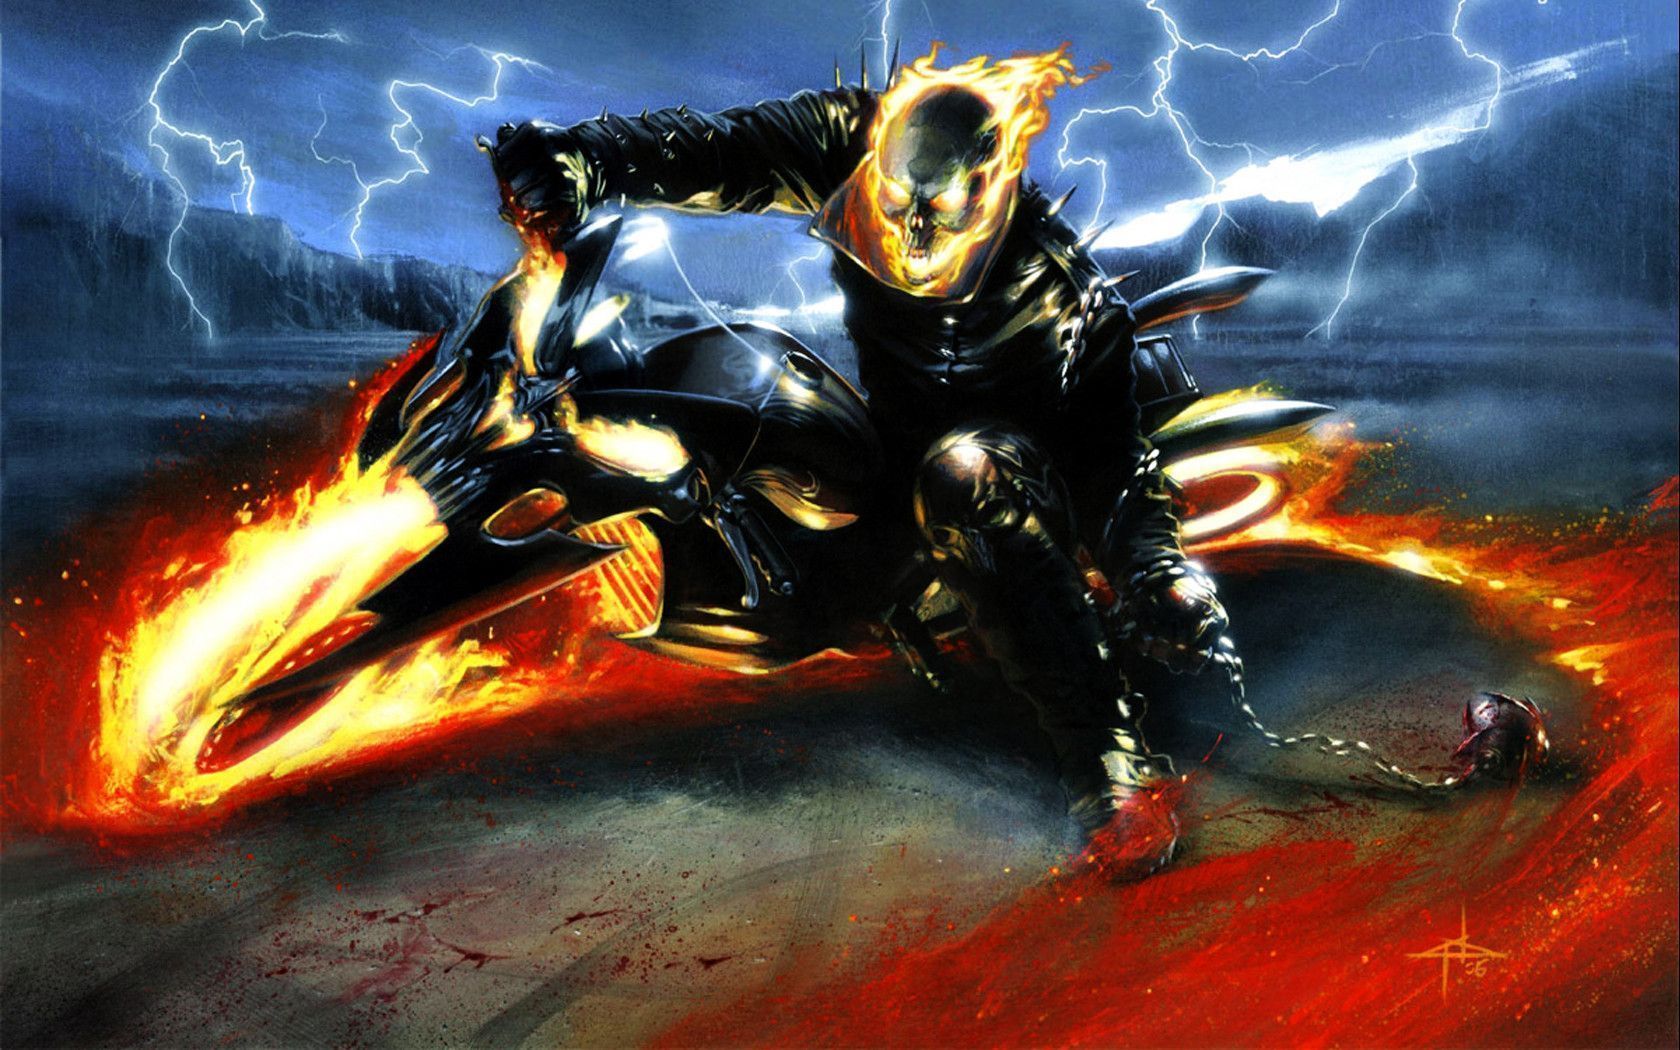 Ghost Rider HD Wallpapers - Wallpaper Cave